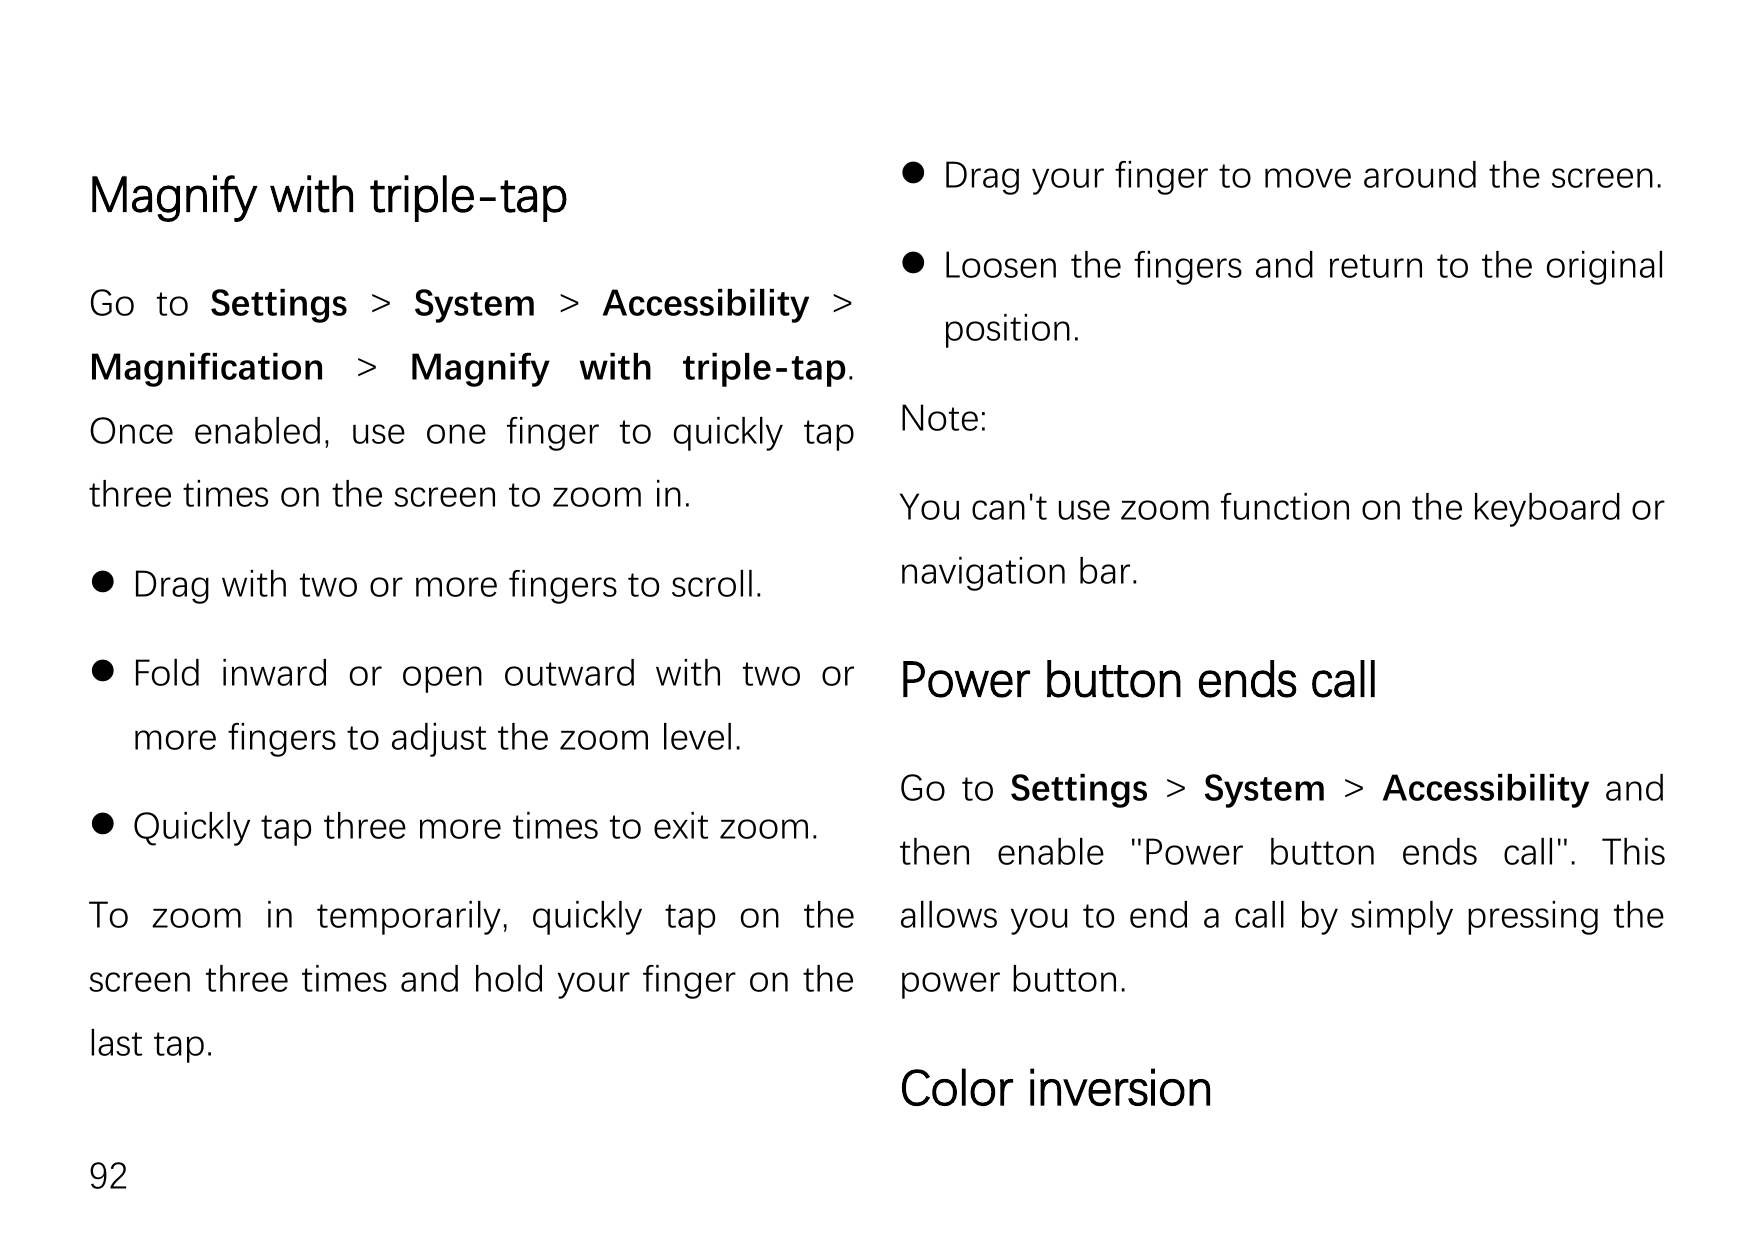 Magnify with triple-tapGo to Settings > System > Accessibility >Magnification > Magnify with triple-tap. Drag your finger to mo